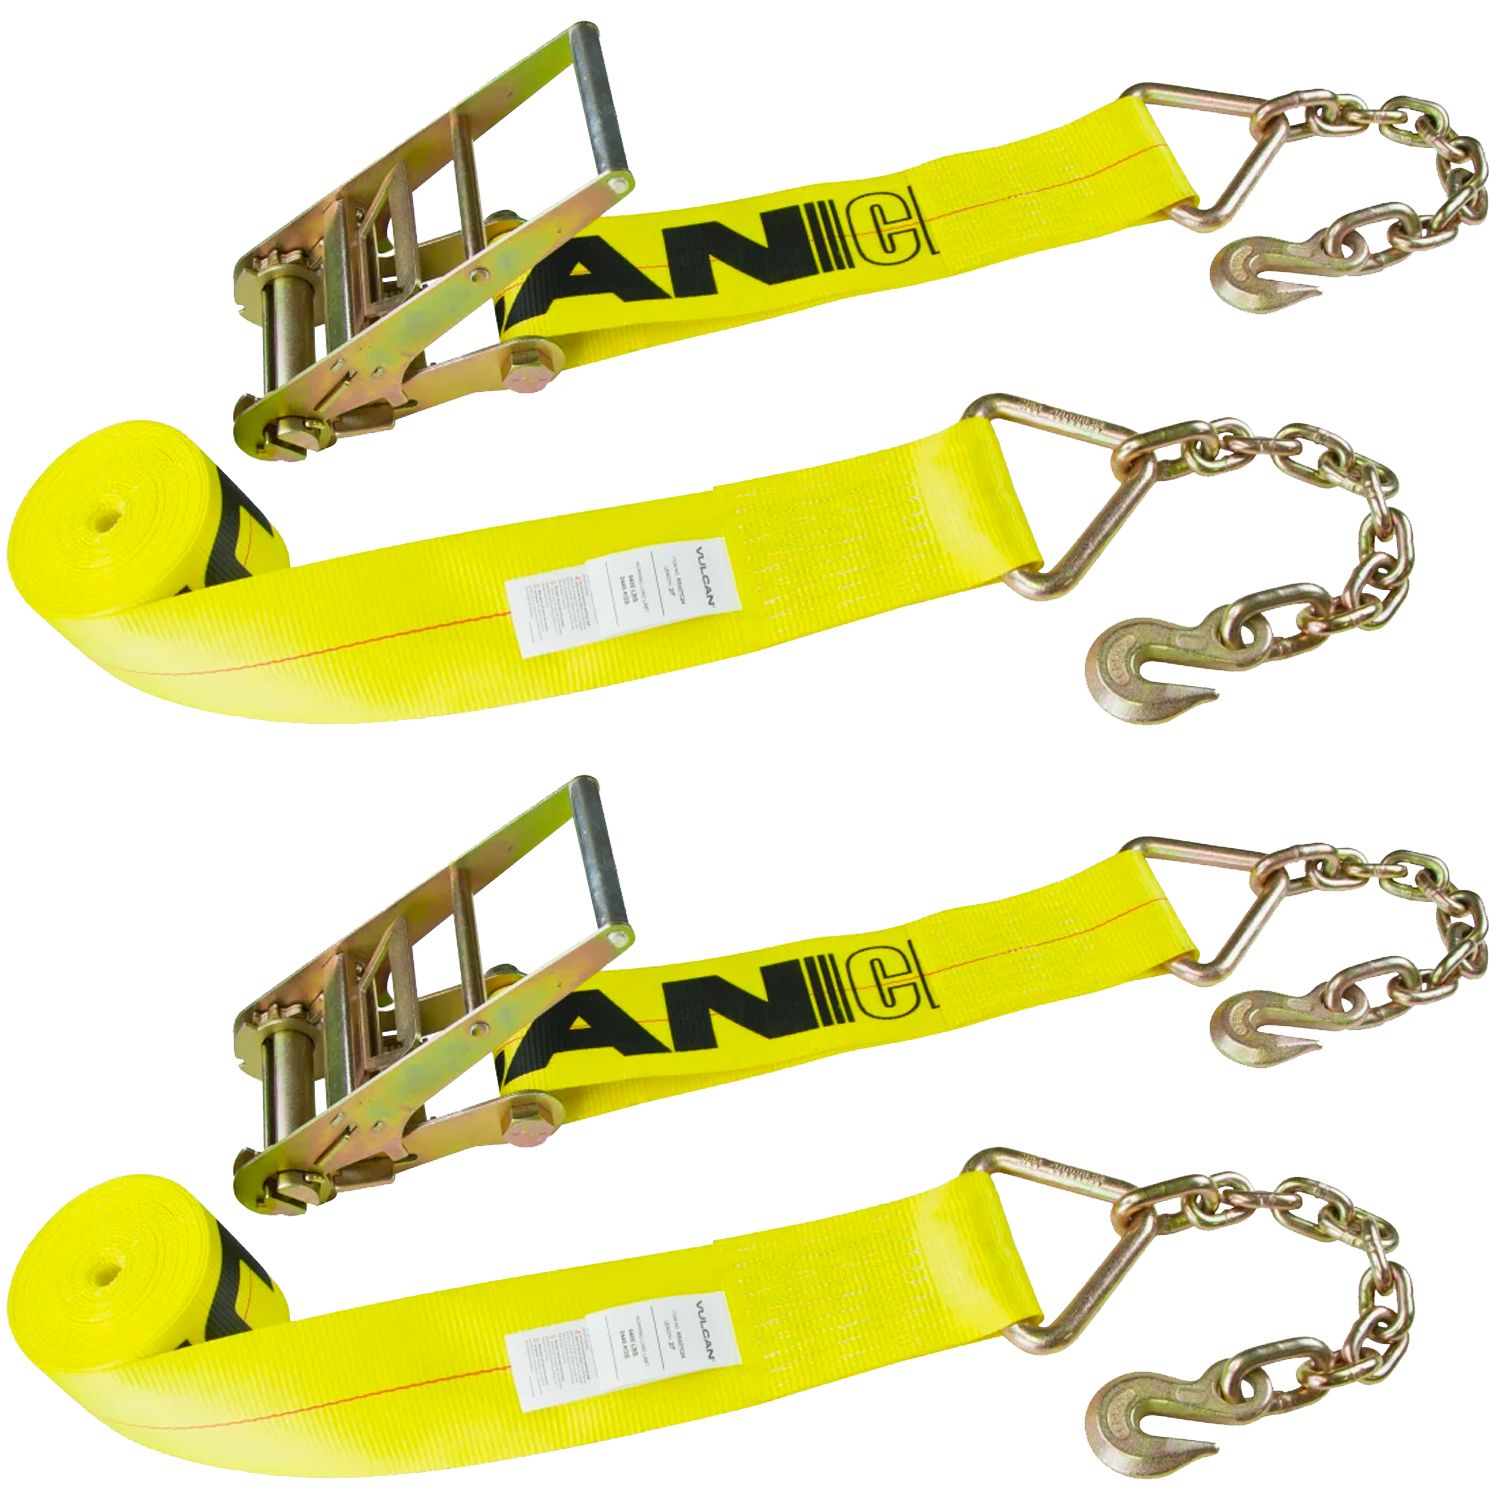 VULCAN Ratchet Strap with Chain Anchors - 4 Inch x 30 Foot - Classic Yellow - 5,400 Pound Safe Working Load